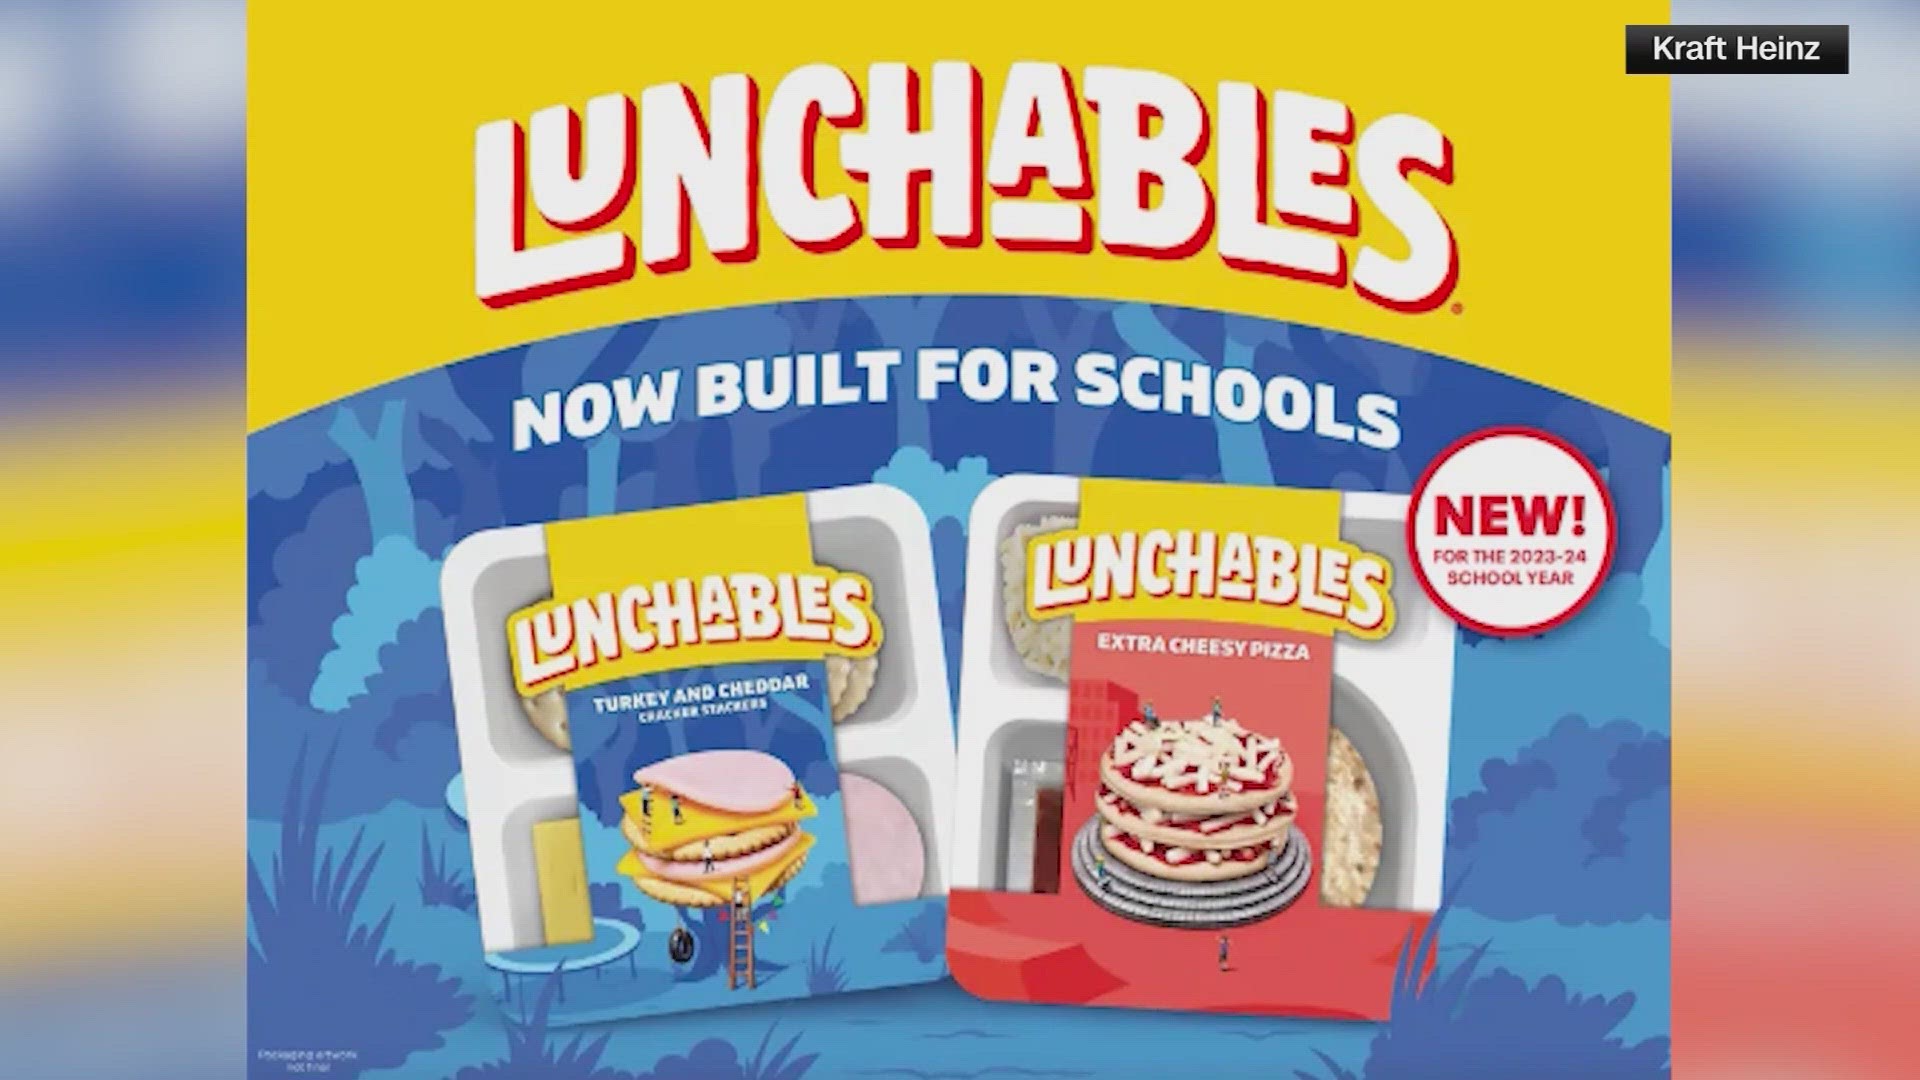 Consumer Reports says it found relatively high levels of lead and sodium in Lunchables.